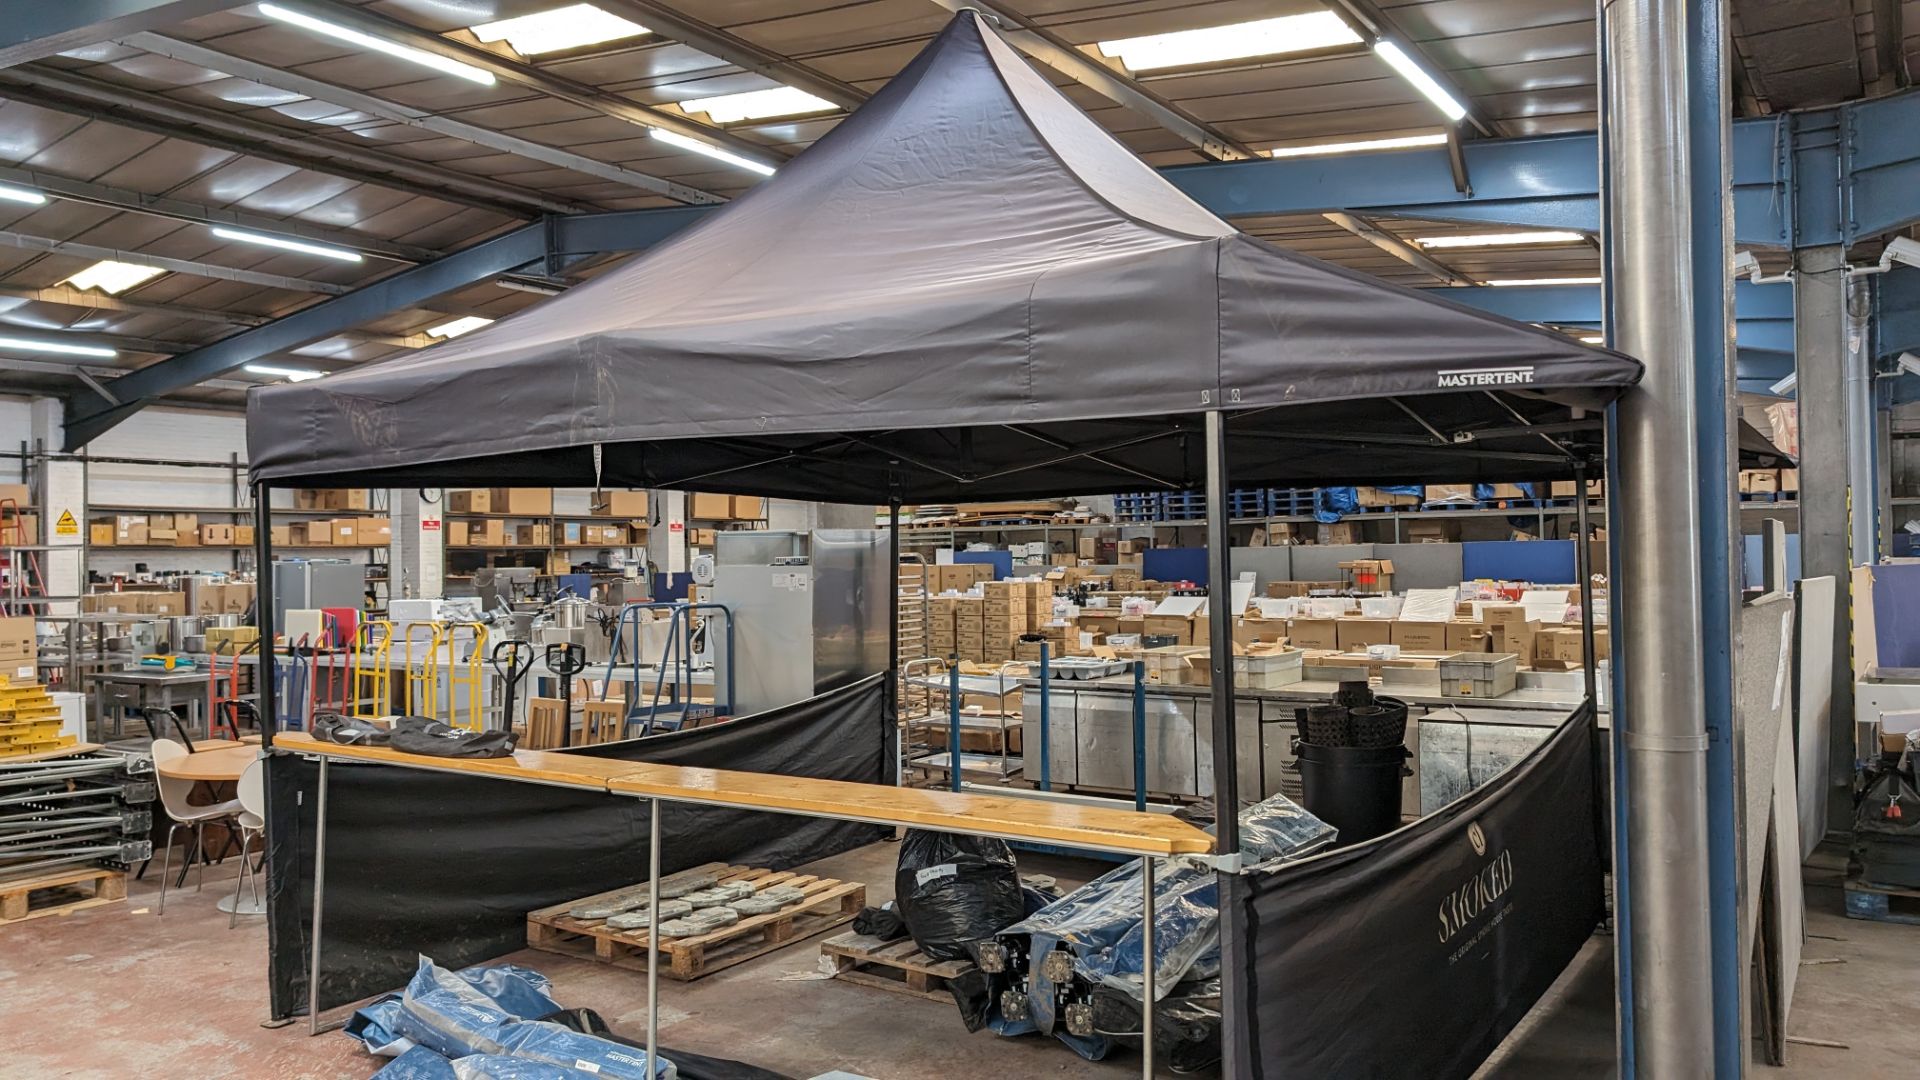 Mastertent 4m x 4m canopy tent (gazebo), bought new in May 2022 for approximately £3,600. This item